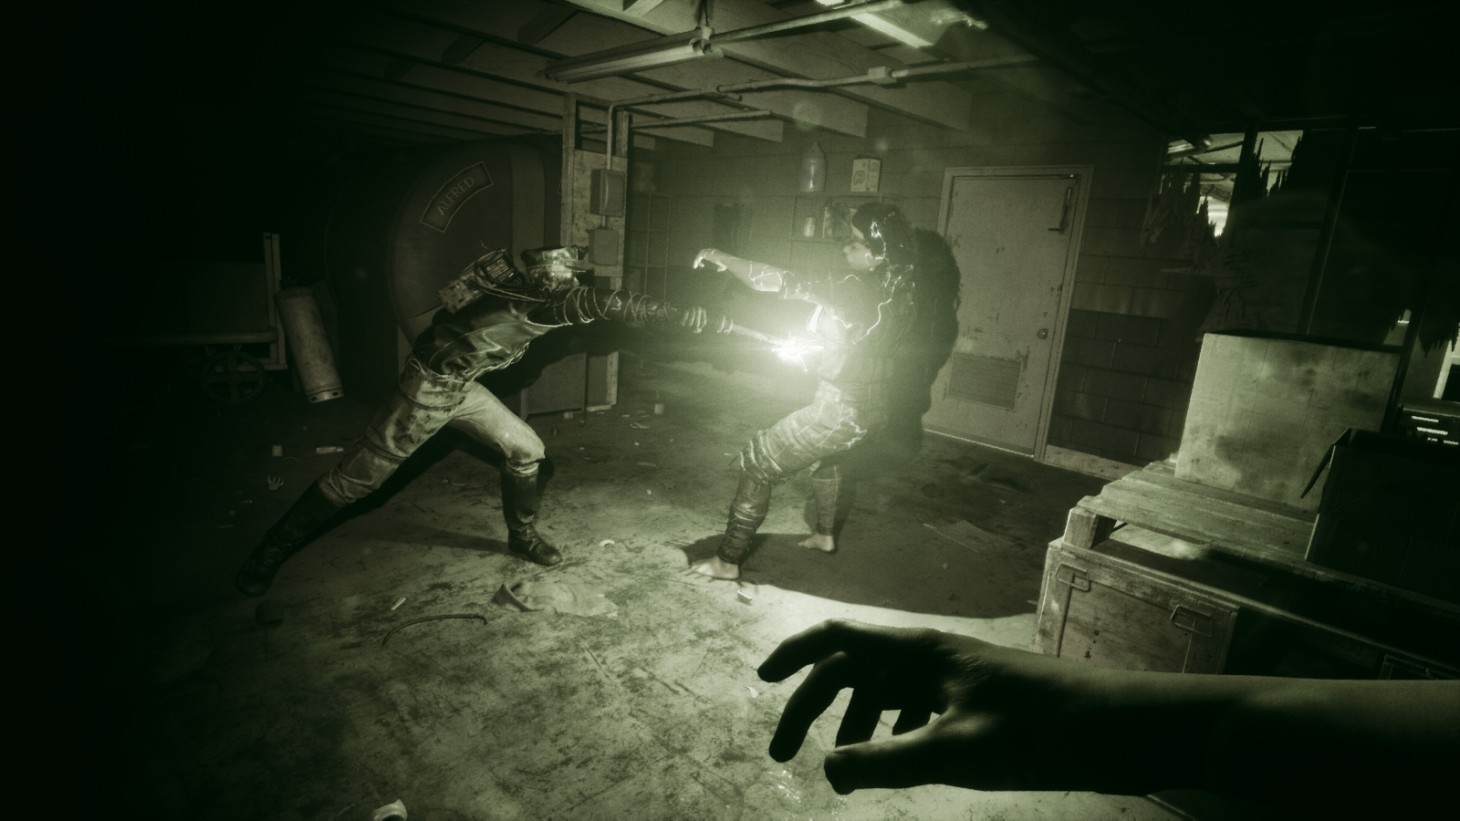 The Outlast Trials in development